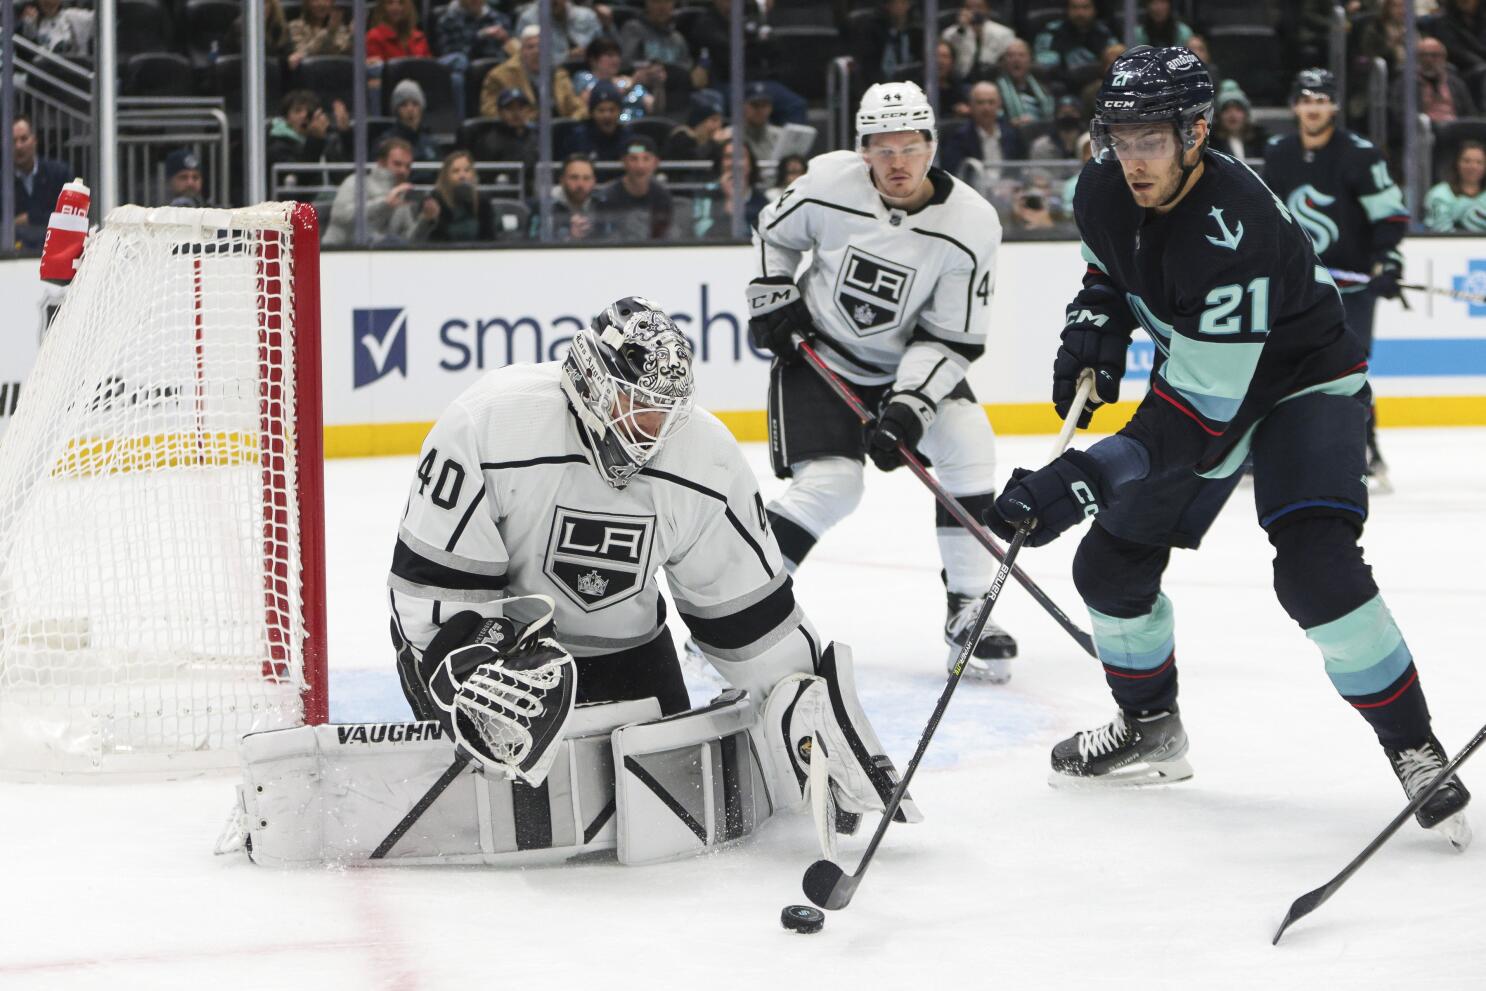 Have the Kings Improved? Defense & Goalies